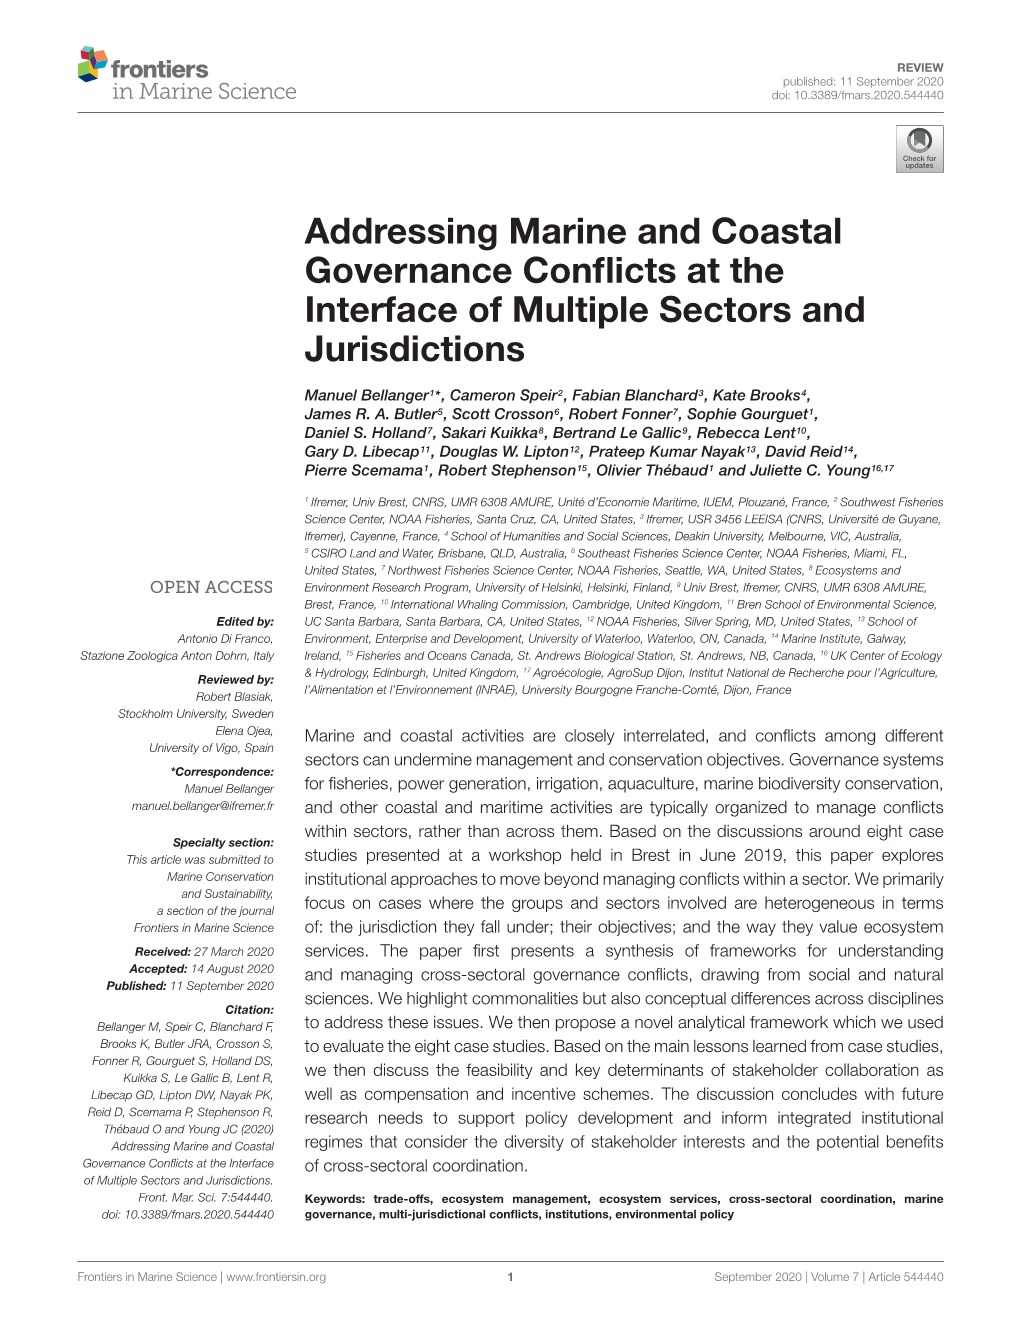 Addressing Marine and Coastal Governance Conflicts at The